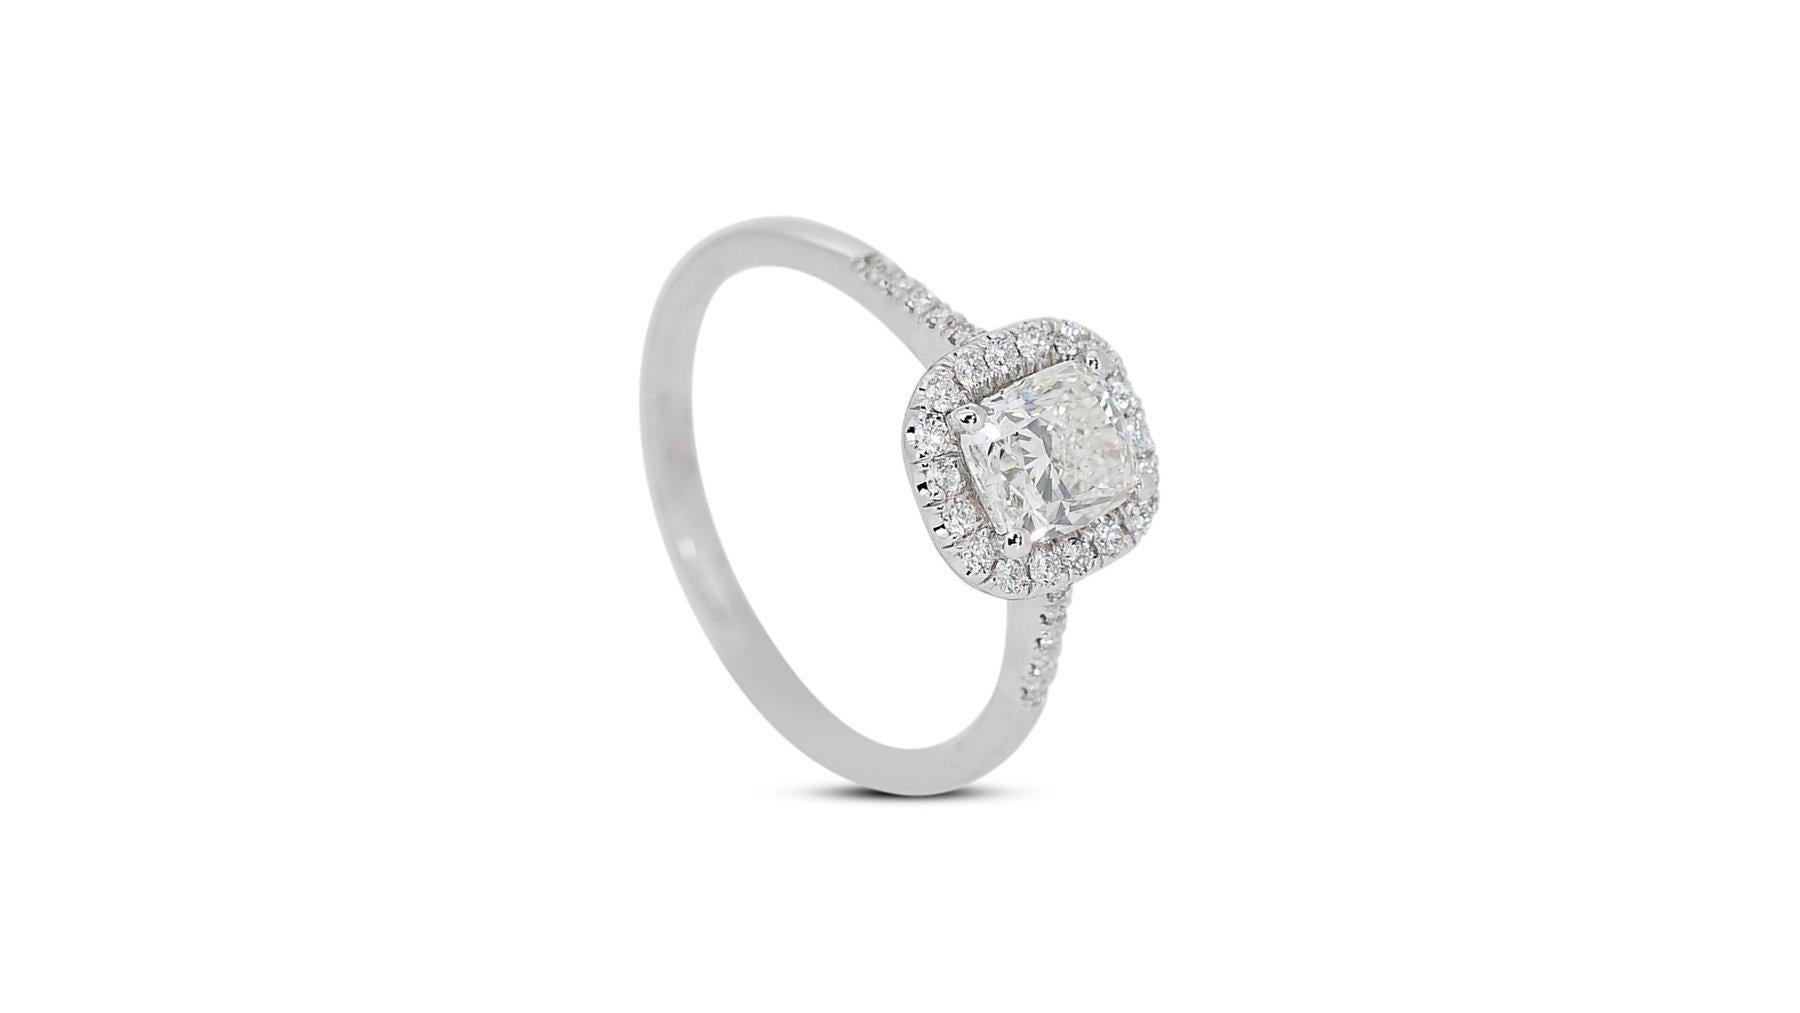 Luxurious 1.71ct Diamond Halo Ring in 18k White Gold - GIA Certified For Sale 2